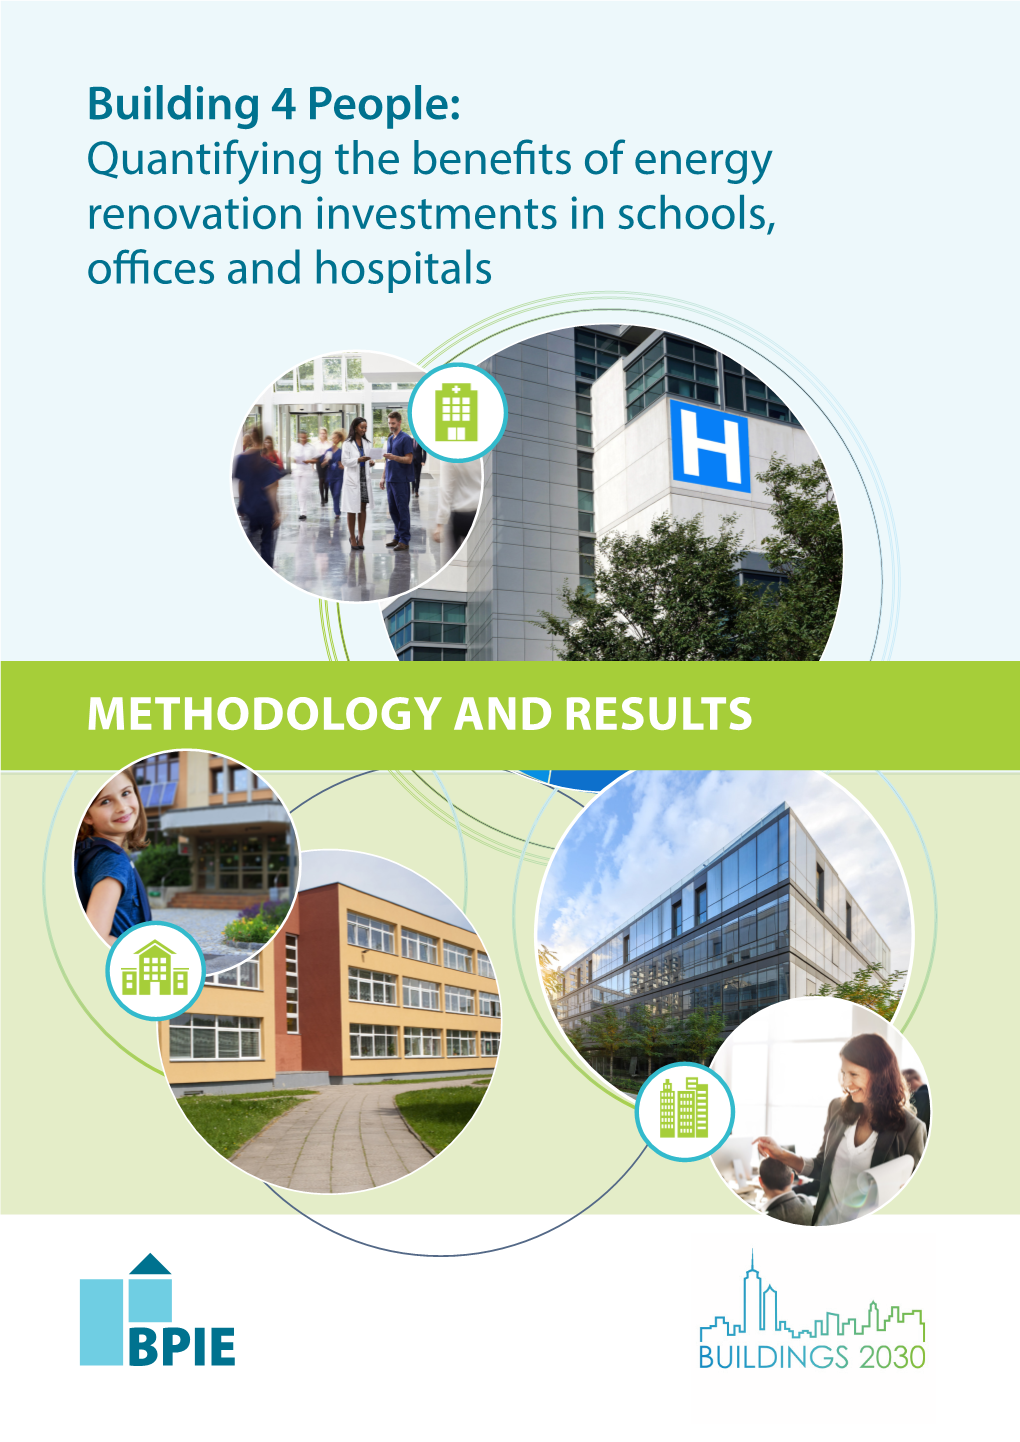 Building 4 People: Quantifying the Benefits of Energy Renovation Investments in Schools, Offices and Hospitals METHODOLOGY